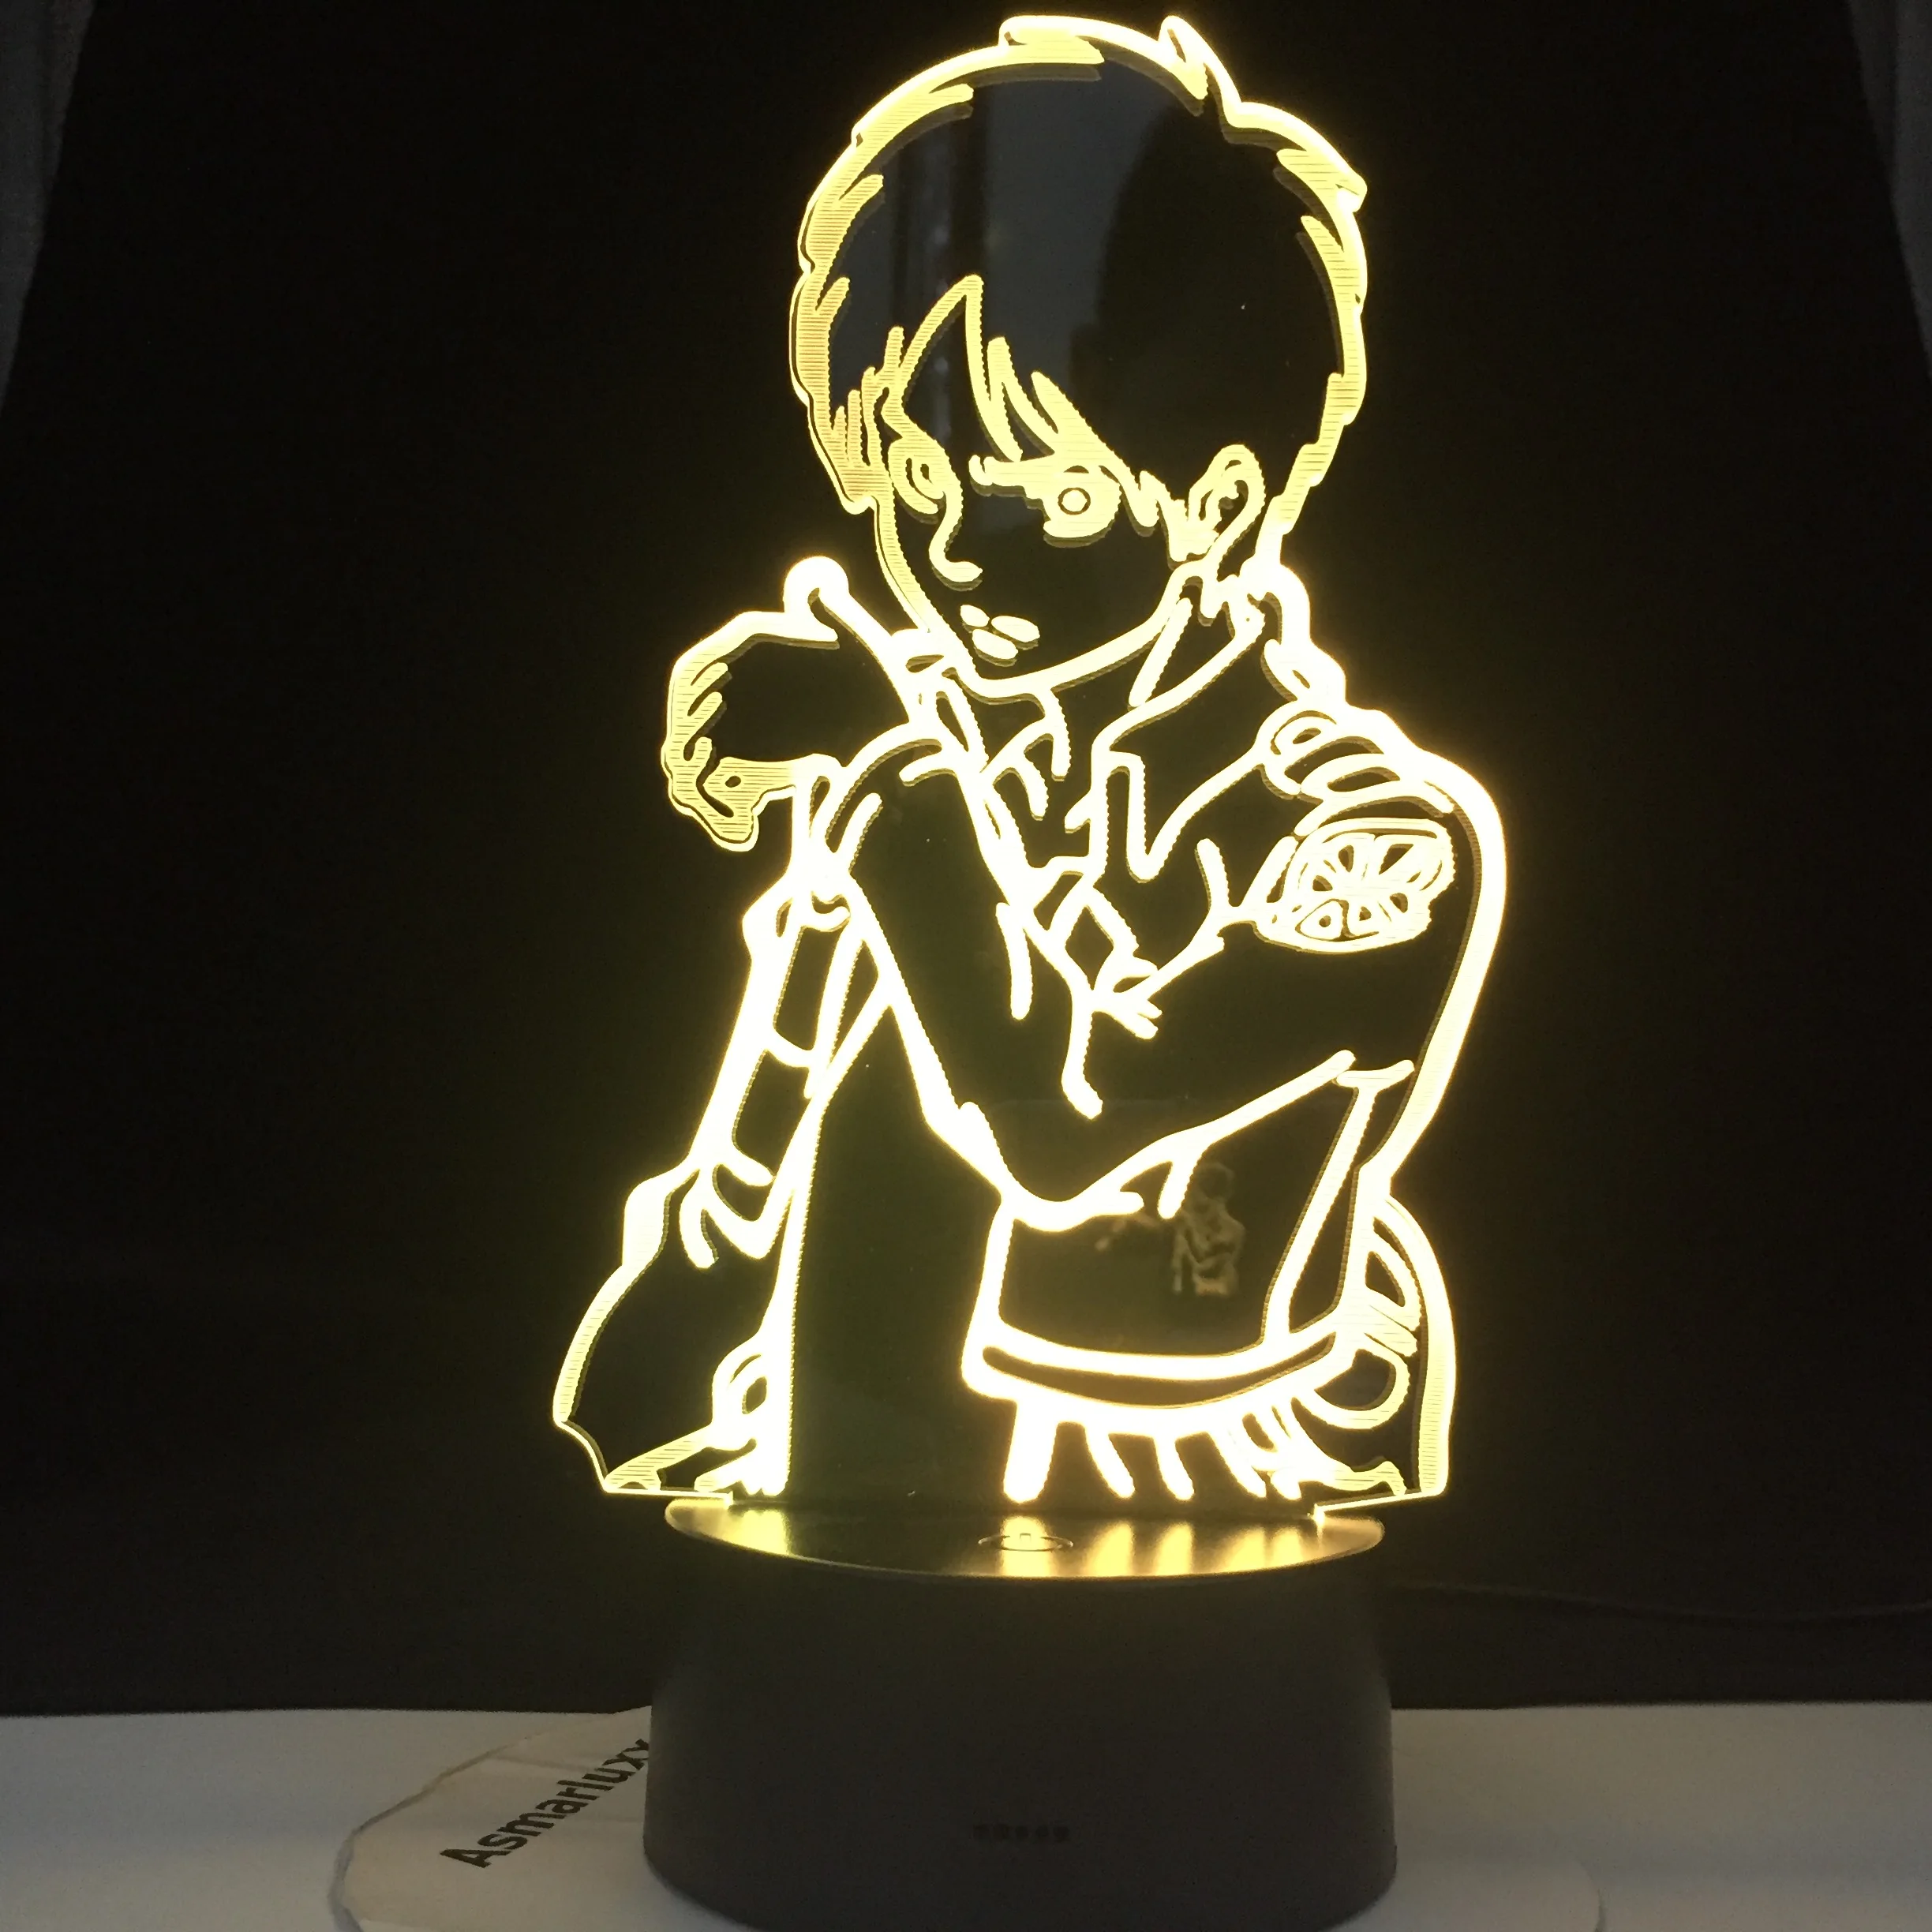 

Eren Yeager Figure Acrylic 3d Lamp Home Room Decor Nightlight Dropshipping Battery Powered Led Night Light Attack on Titan Gift